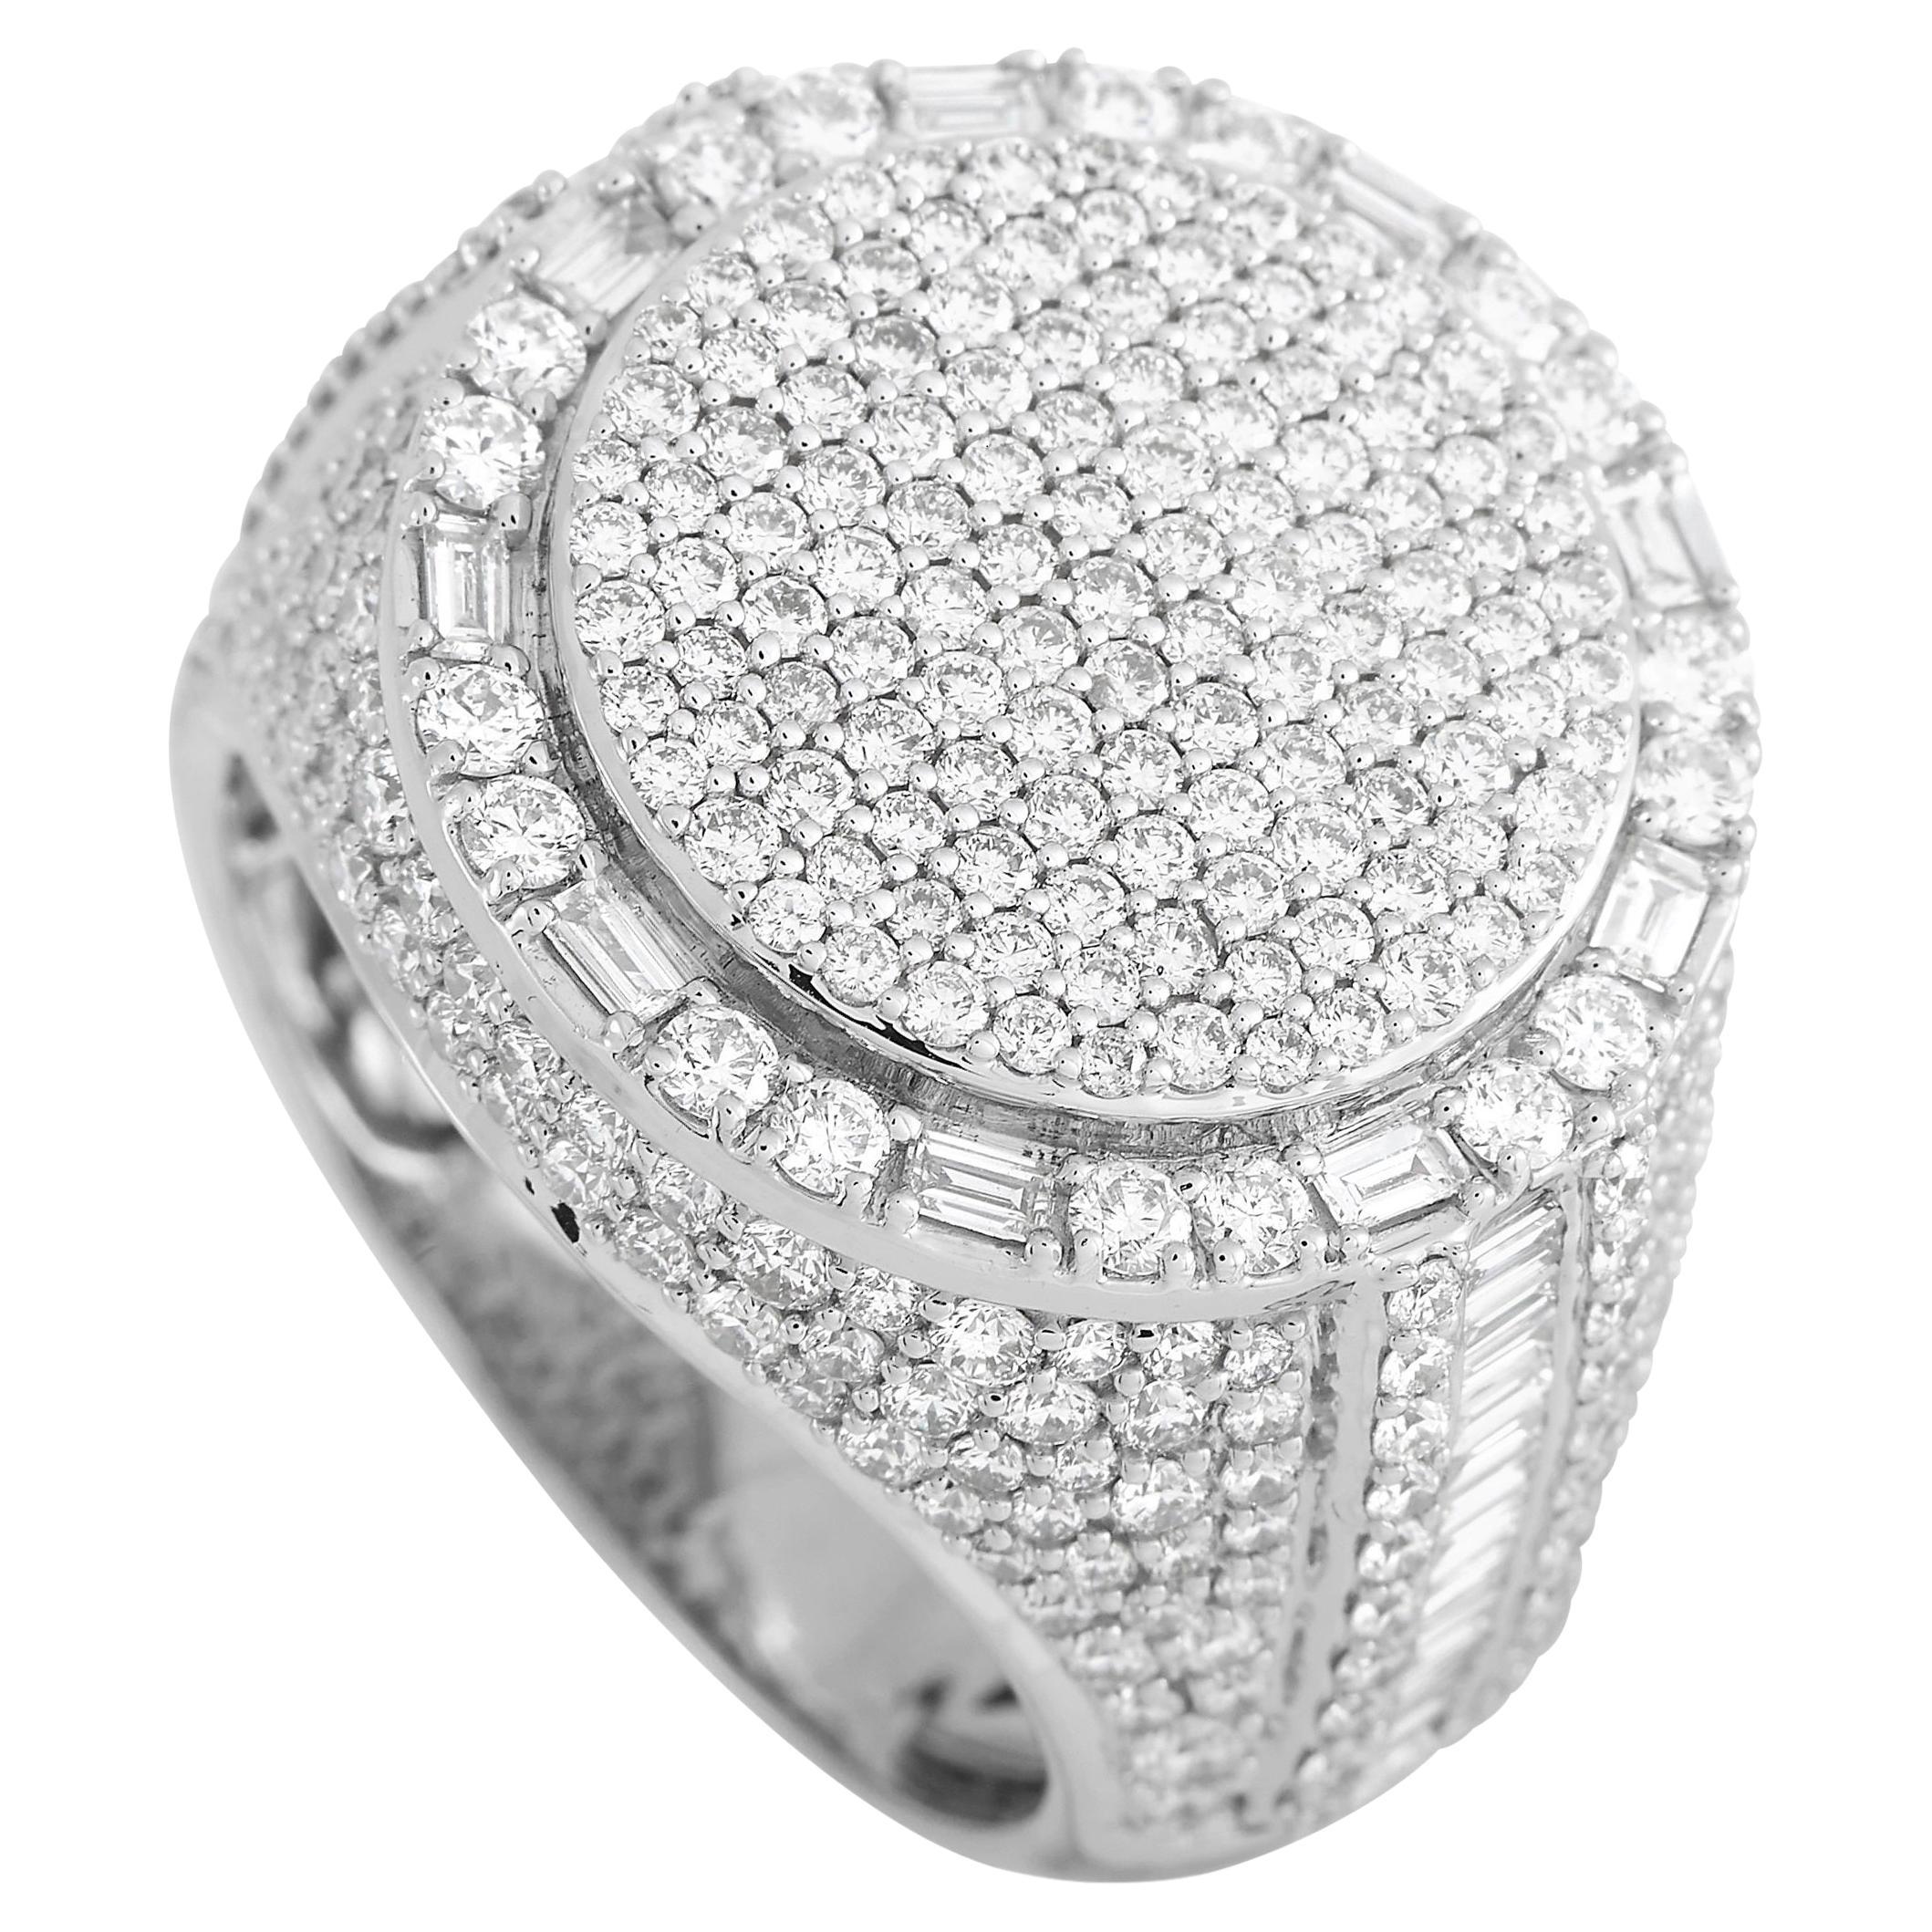 LB Exclusive 14K White Gold 4.50 Ct Diamond Ring For Sale